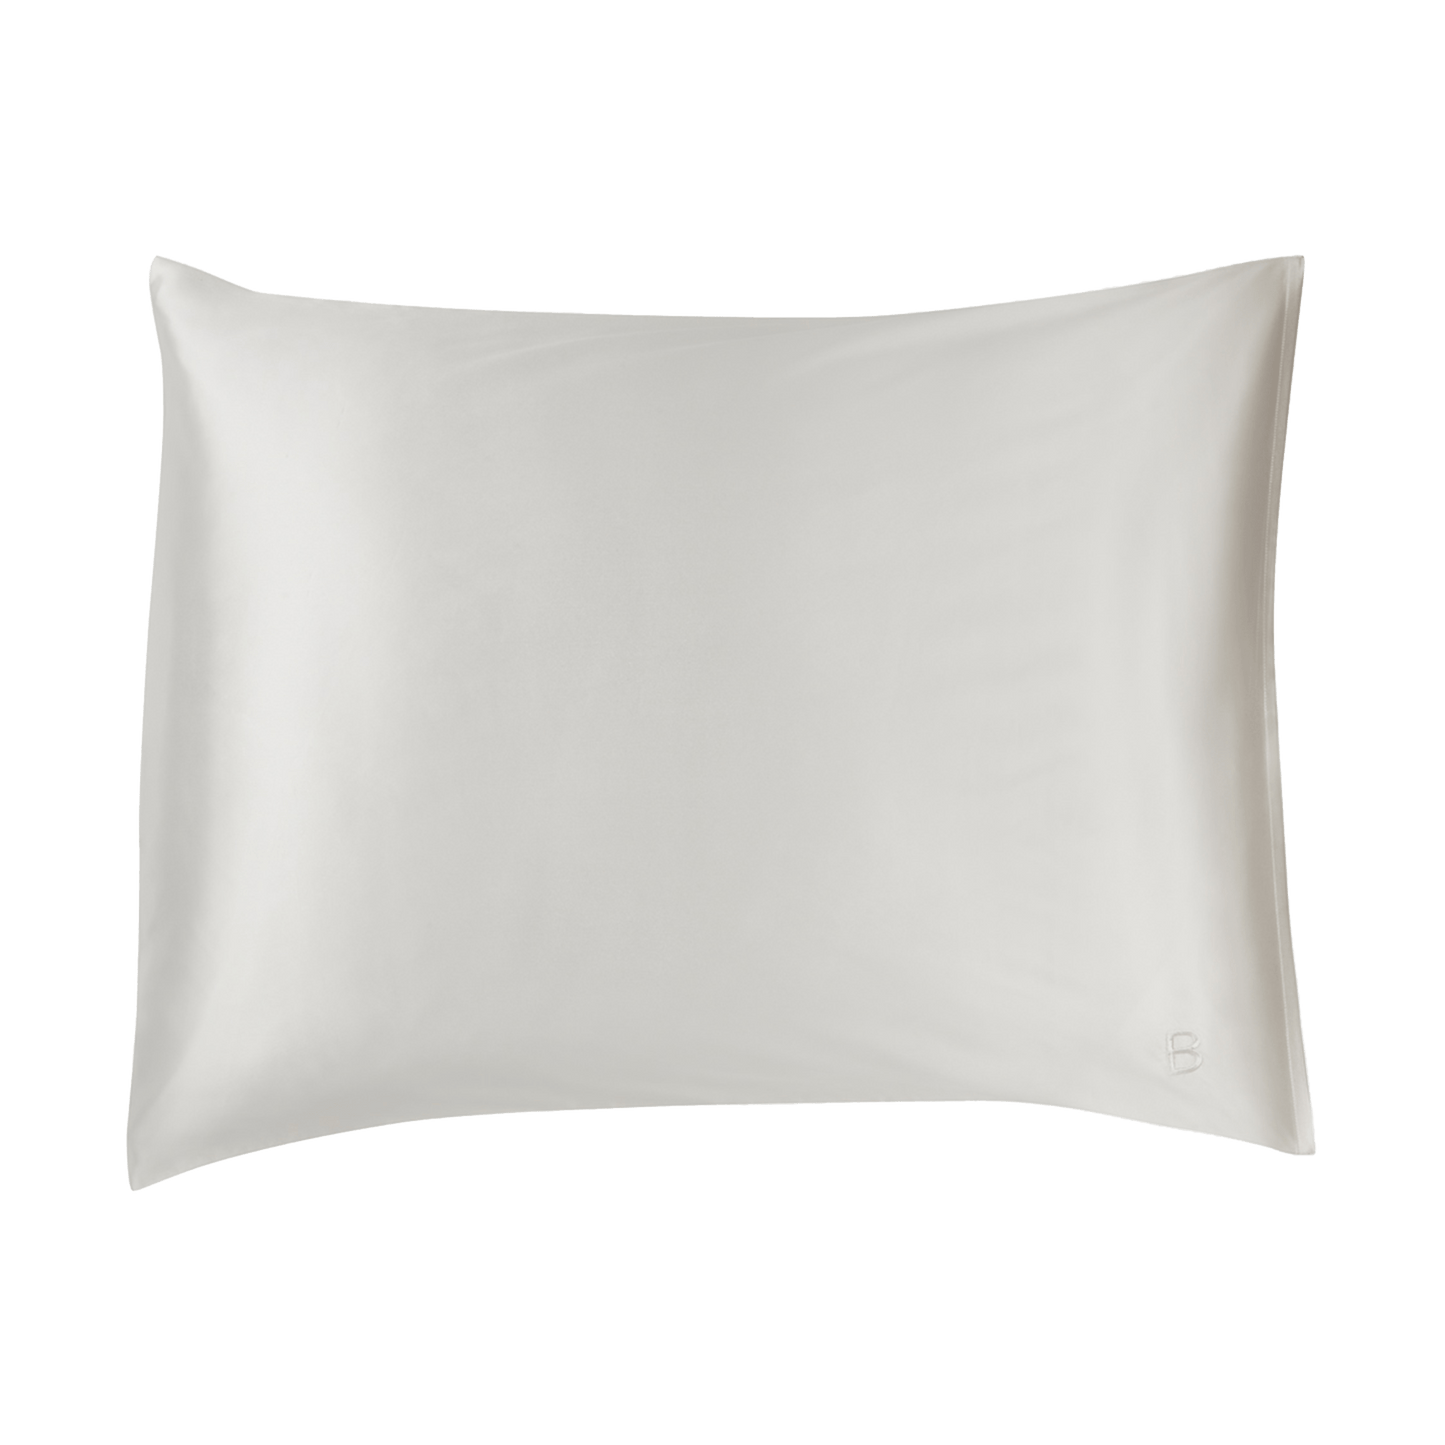 Pillowcase made from the highest quality 100% mulberry silk with a thickness of 22 momme